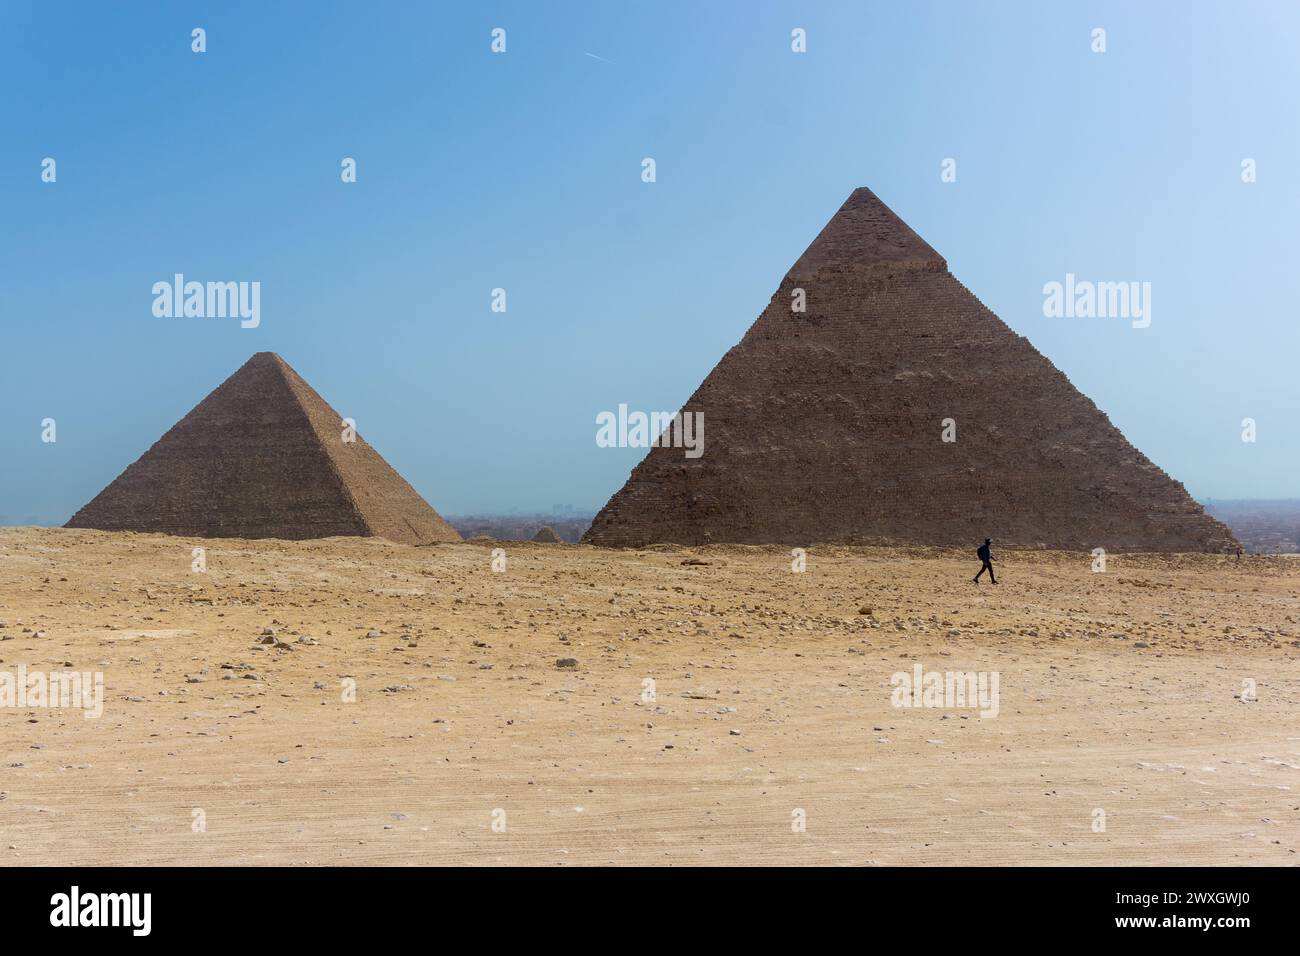 Desert view with Pyramid of Khafre, and the Pyramid of Menkaure, Giza ...